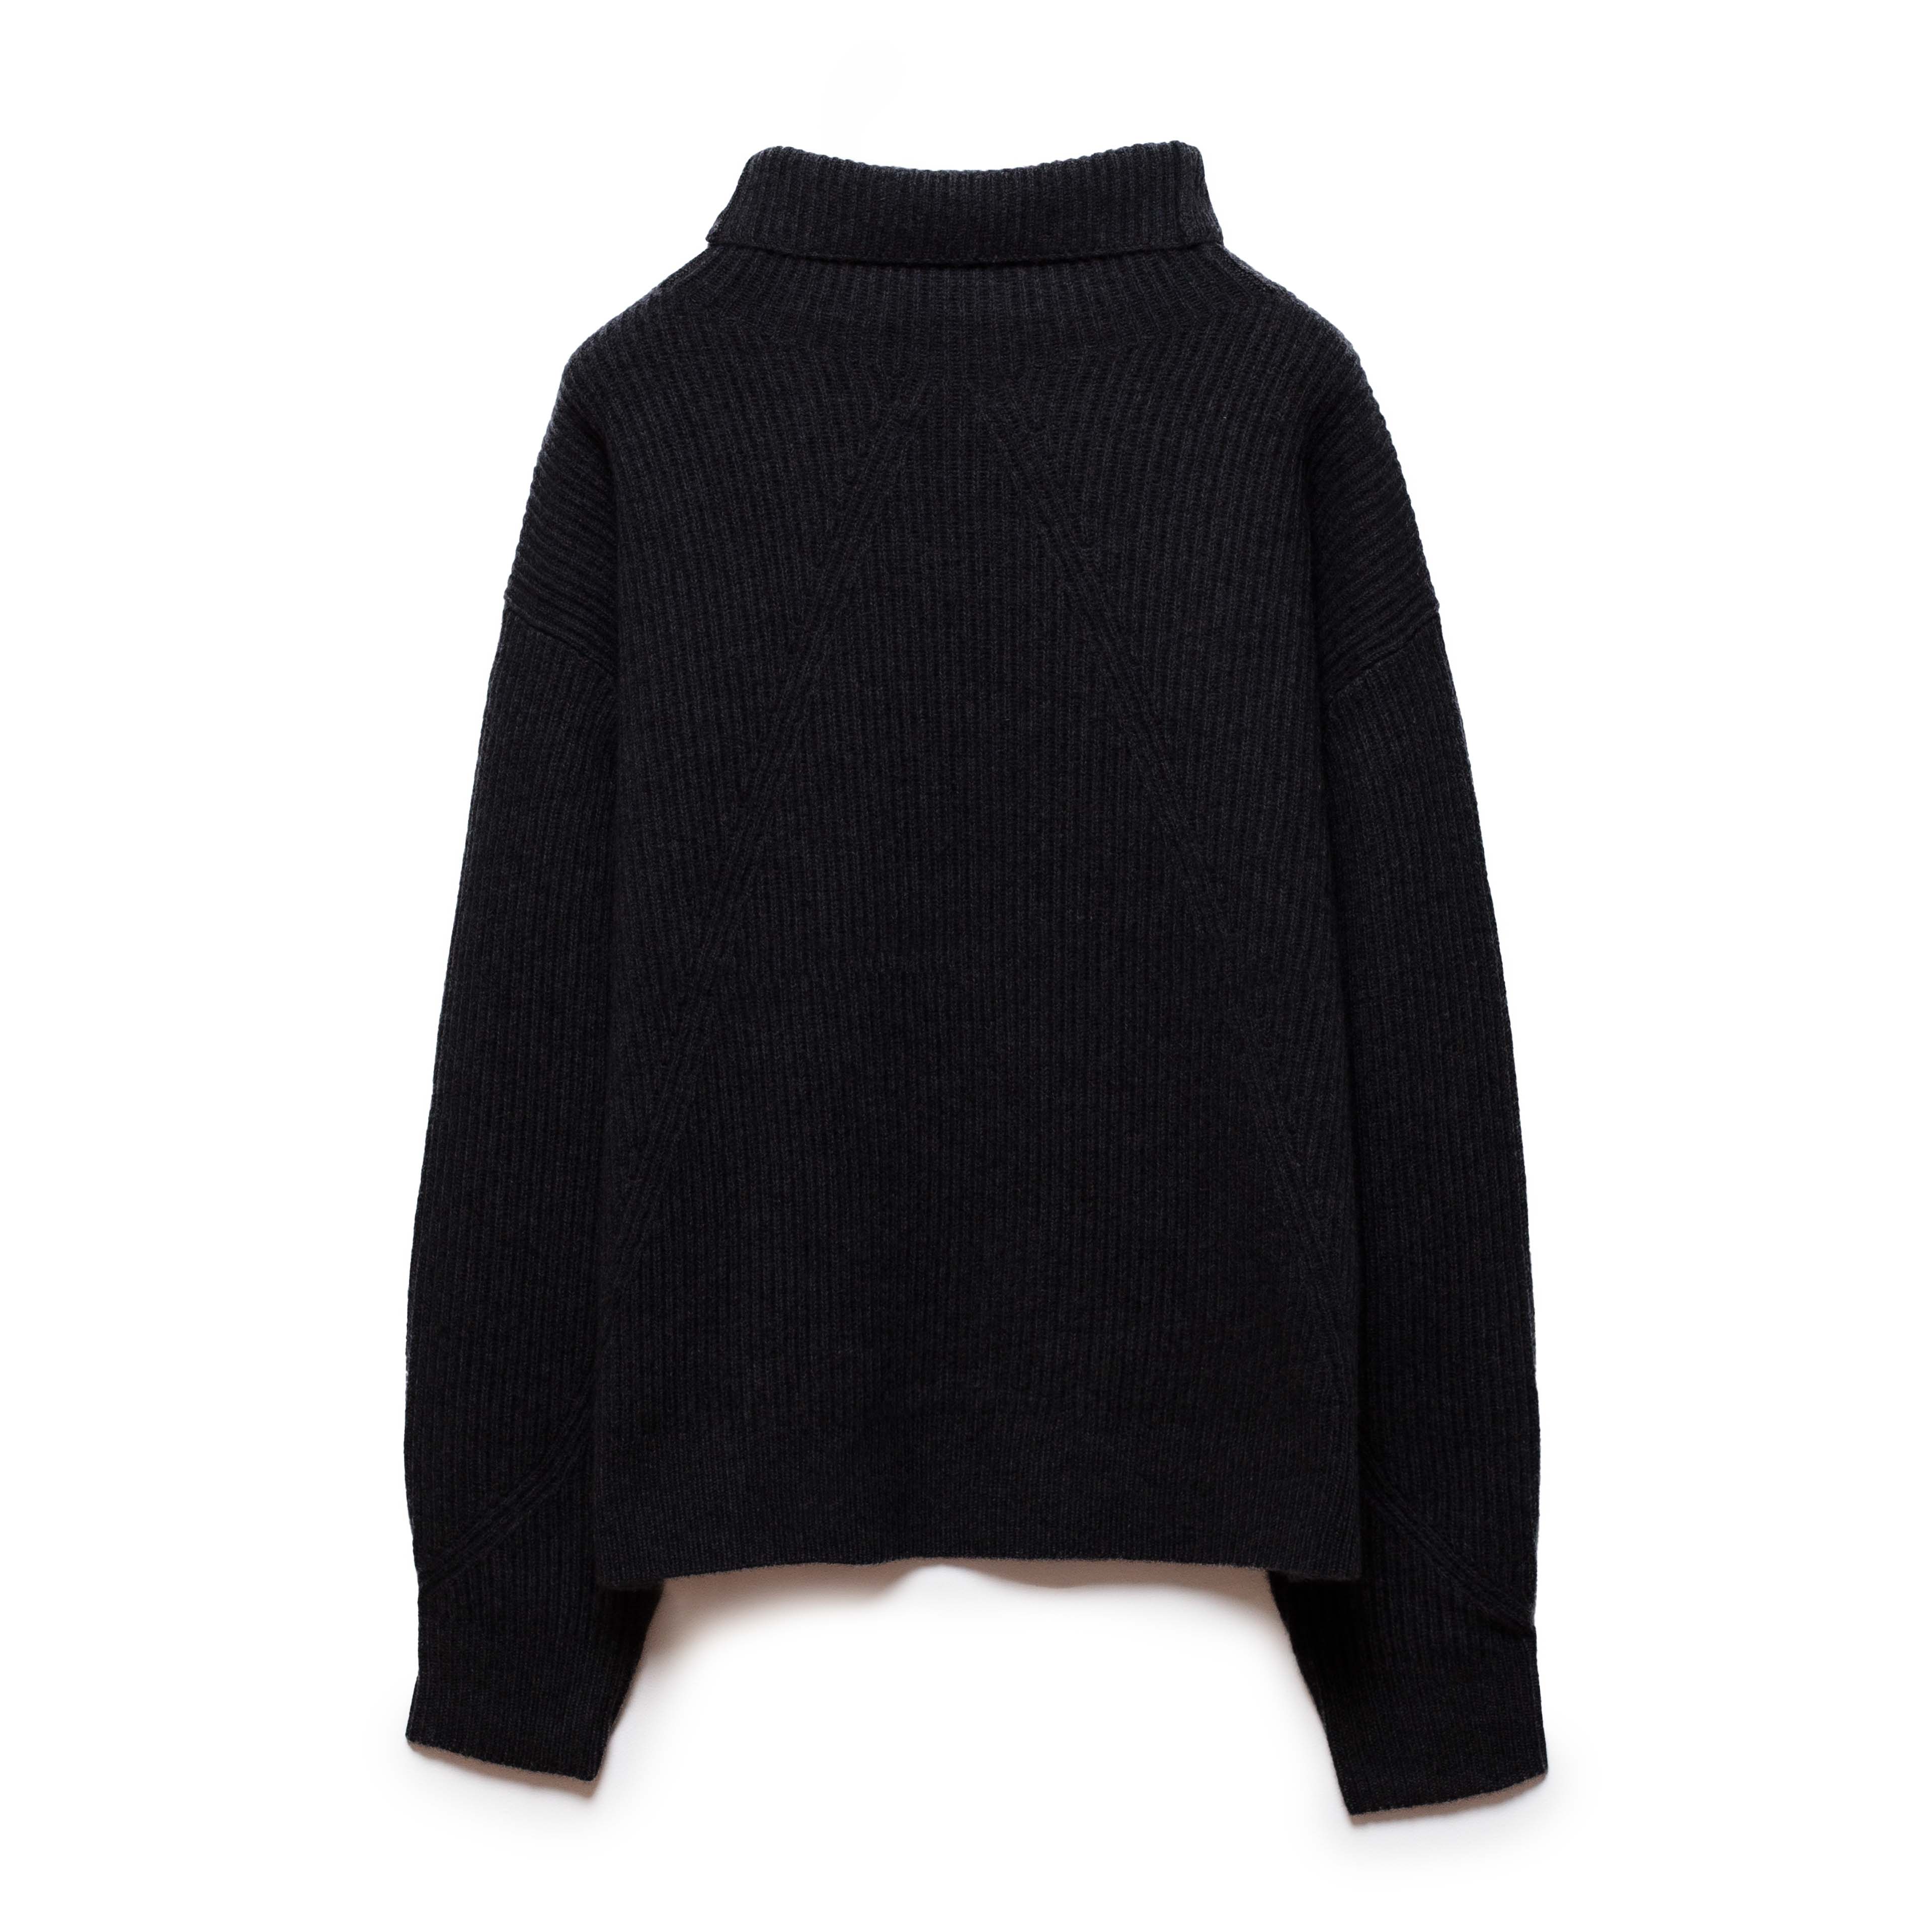 Black Turtleneck Cashmere and Wool